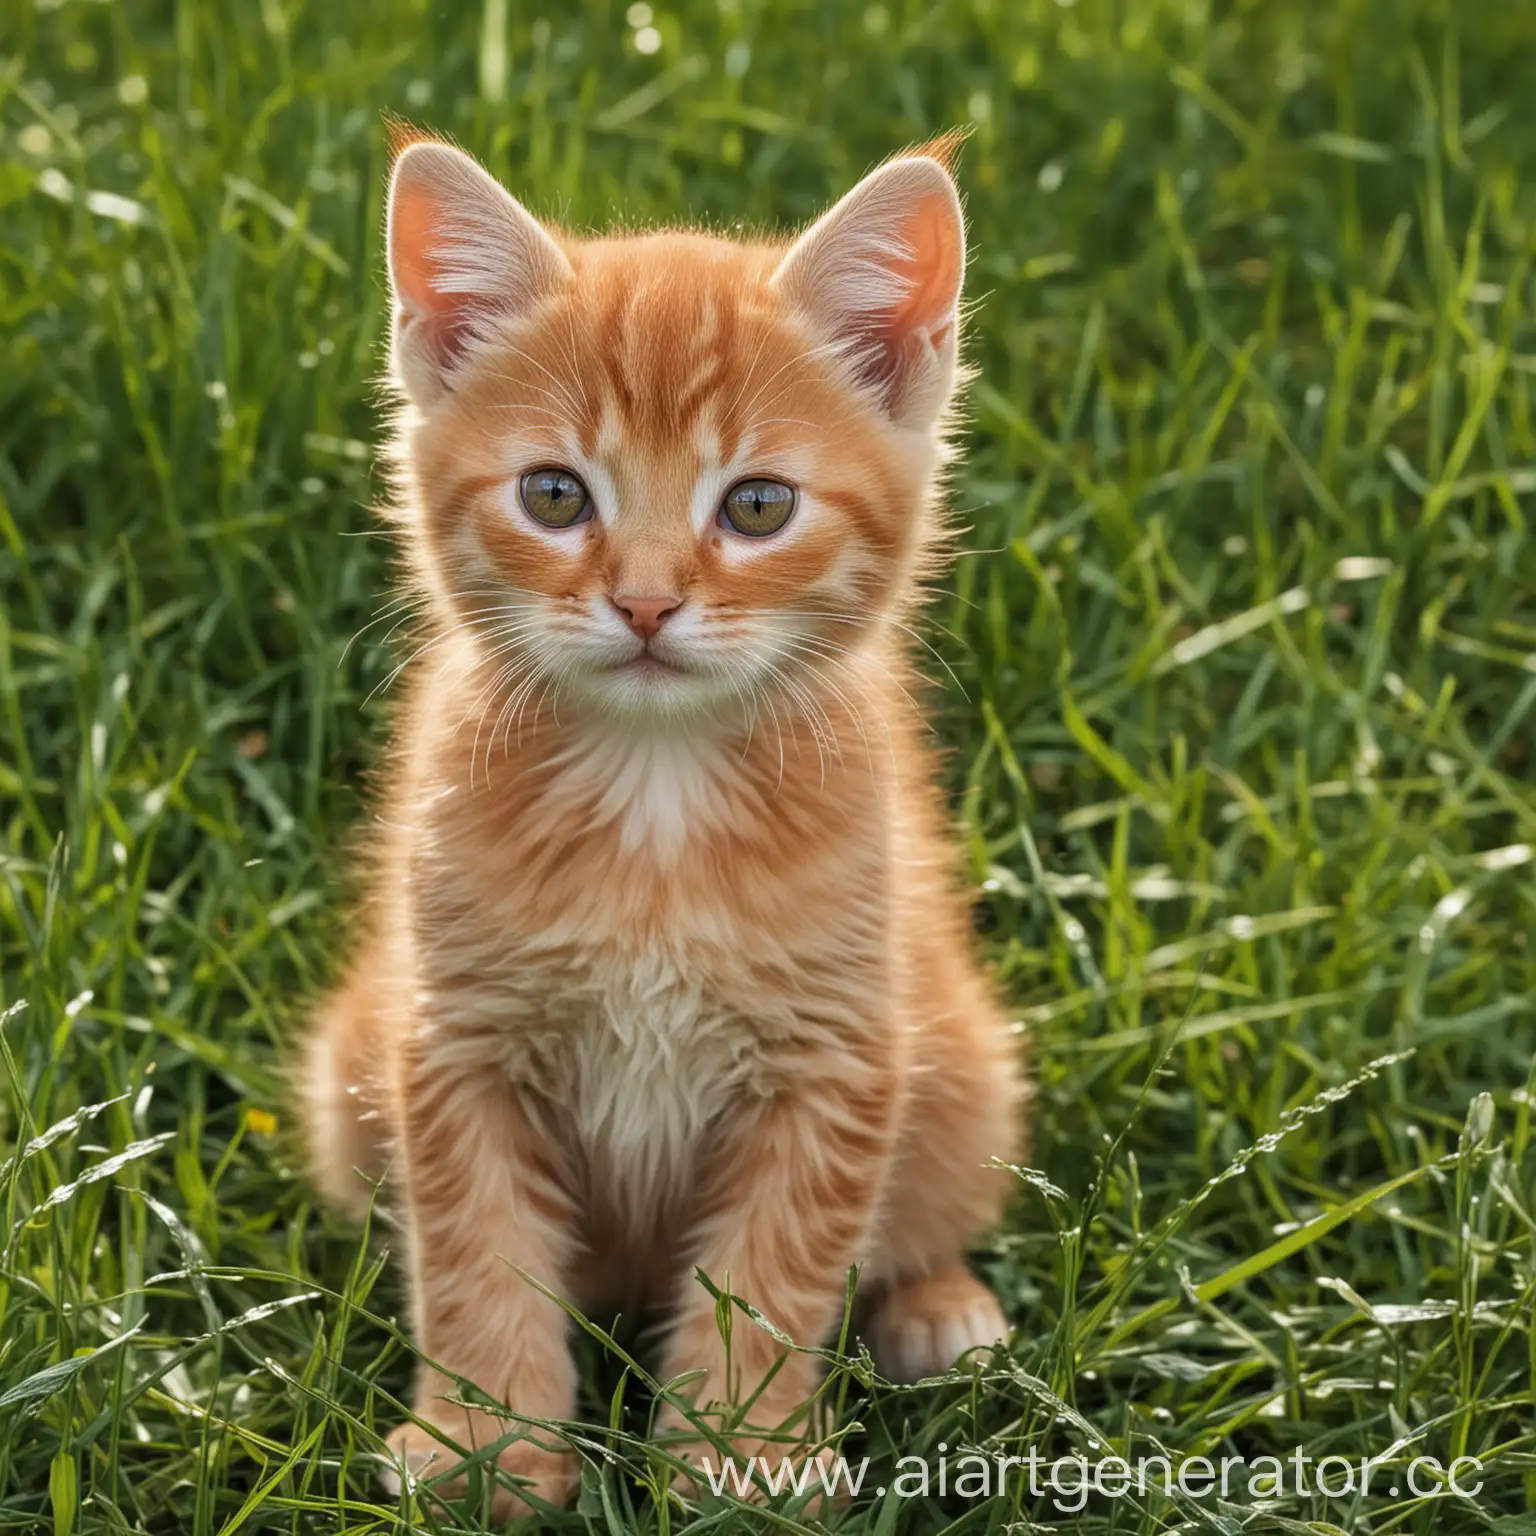 Little red kitty sits in the grass